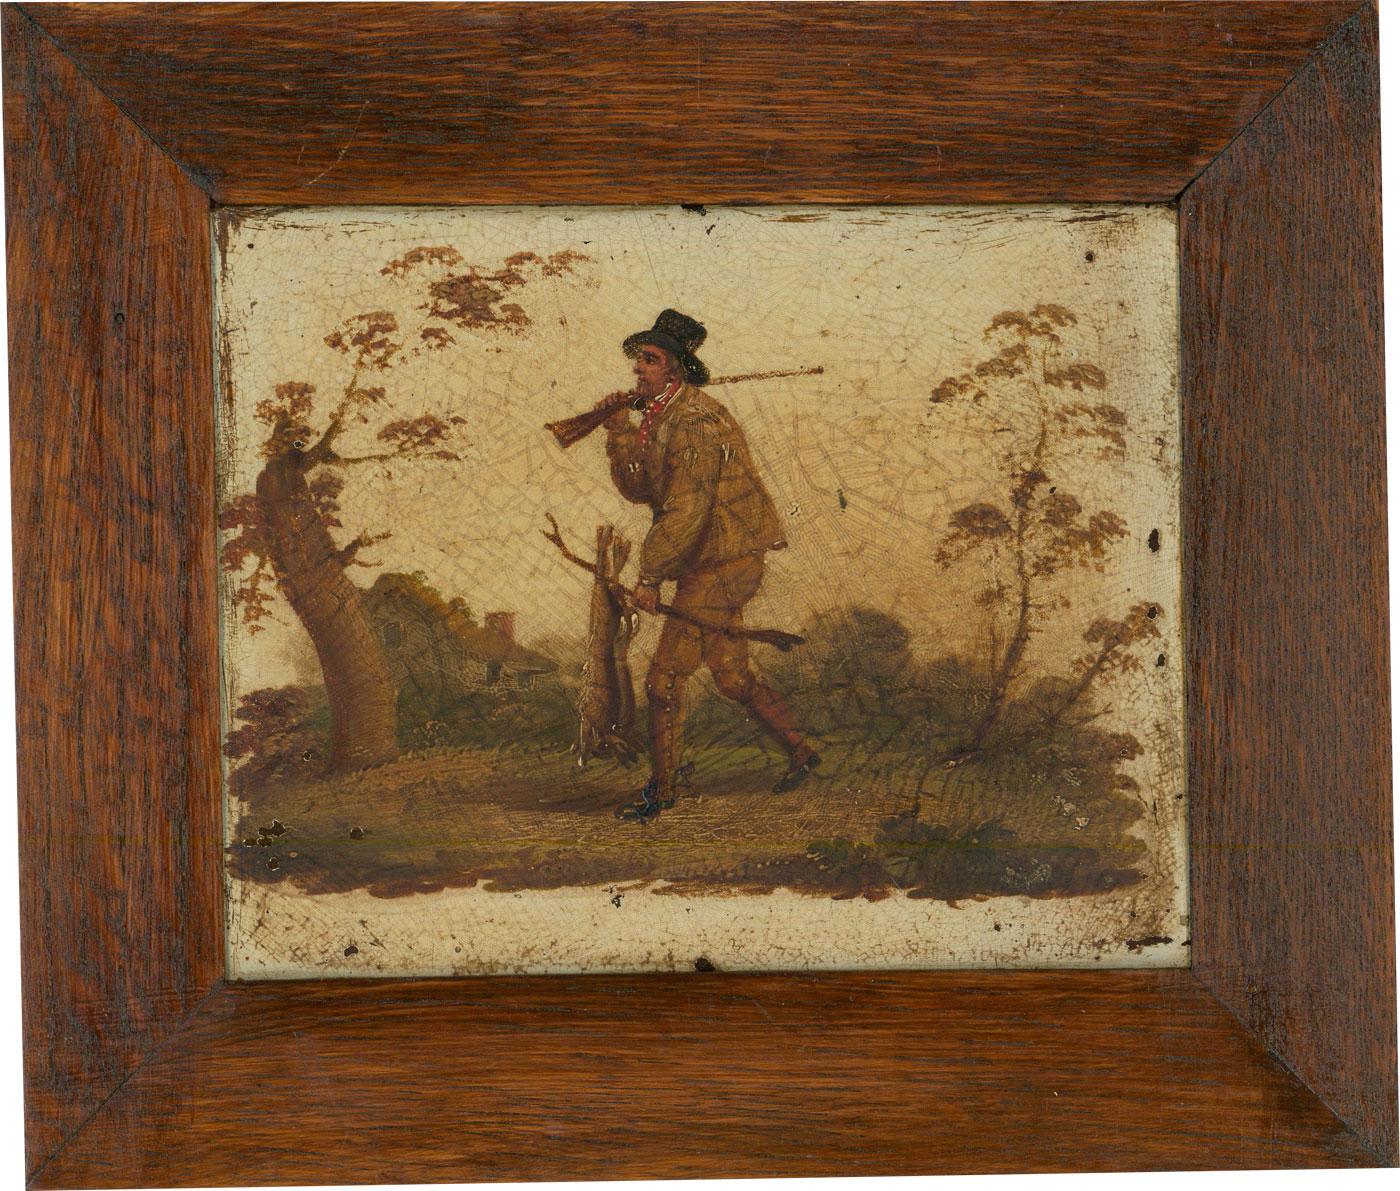 Unknown Landscape Painting - Naive English School 19th Century Oil - After the Shoot